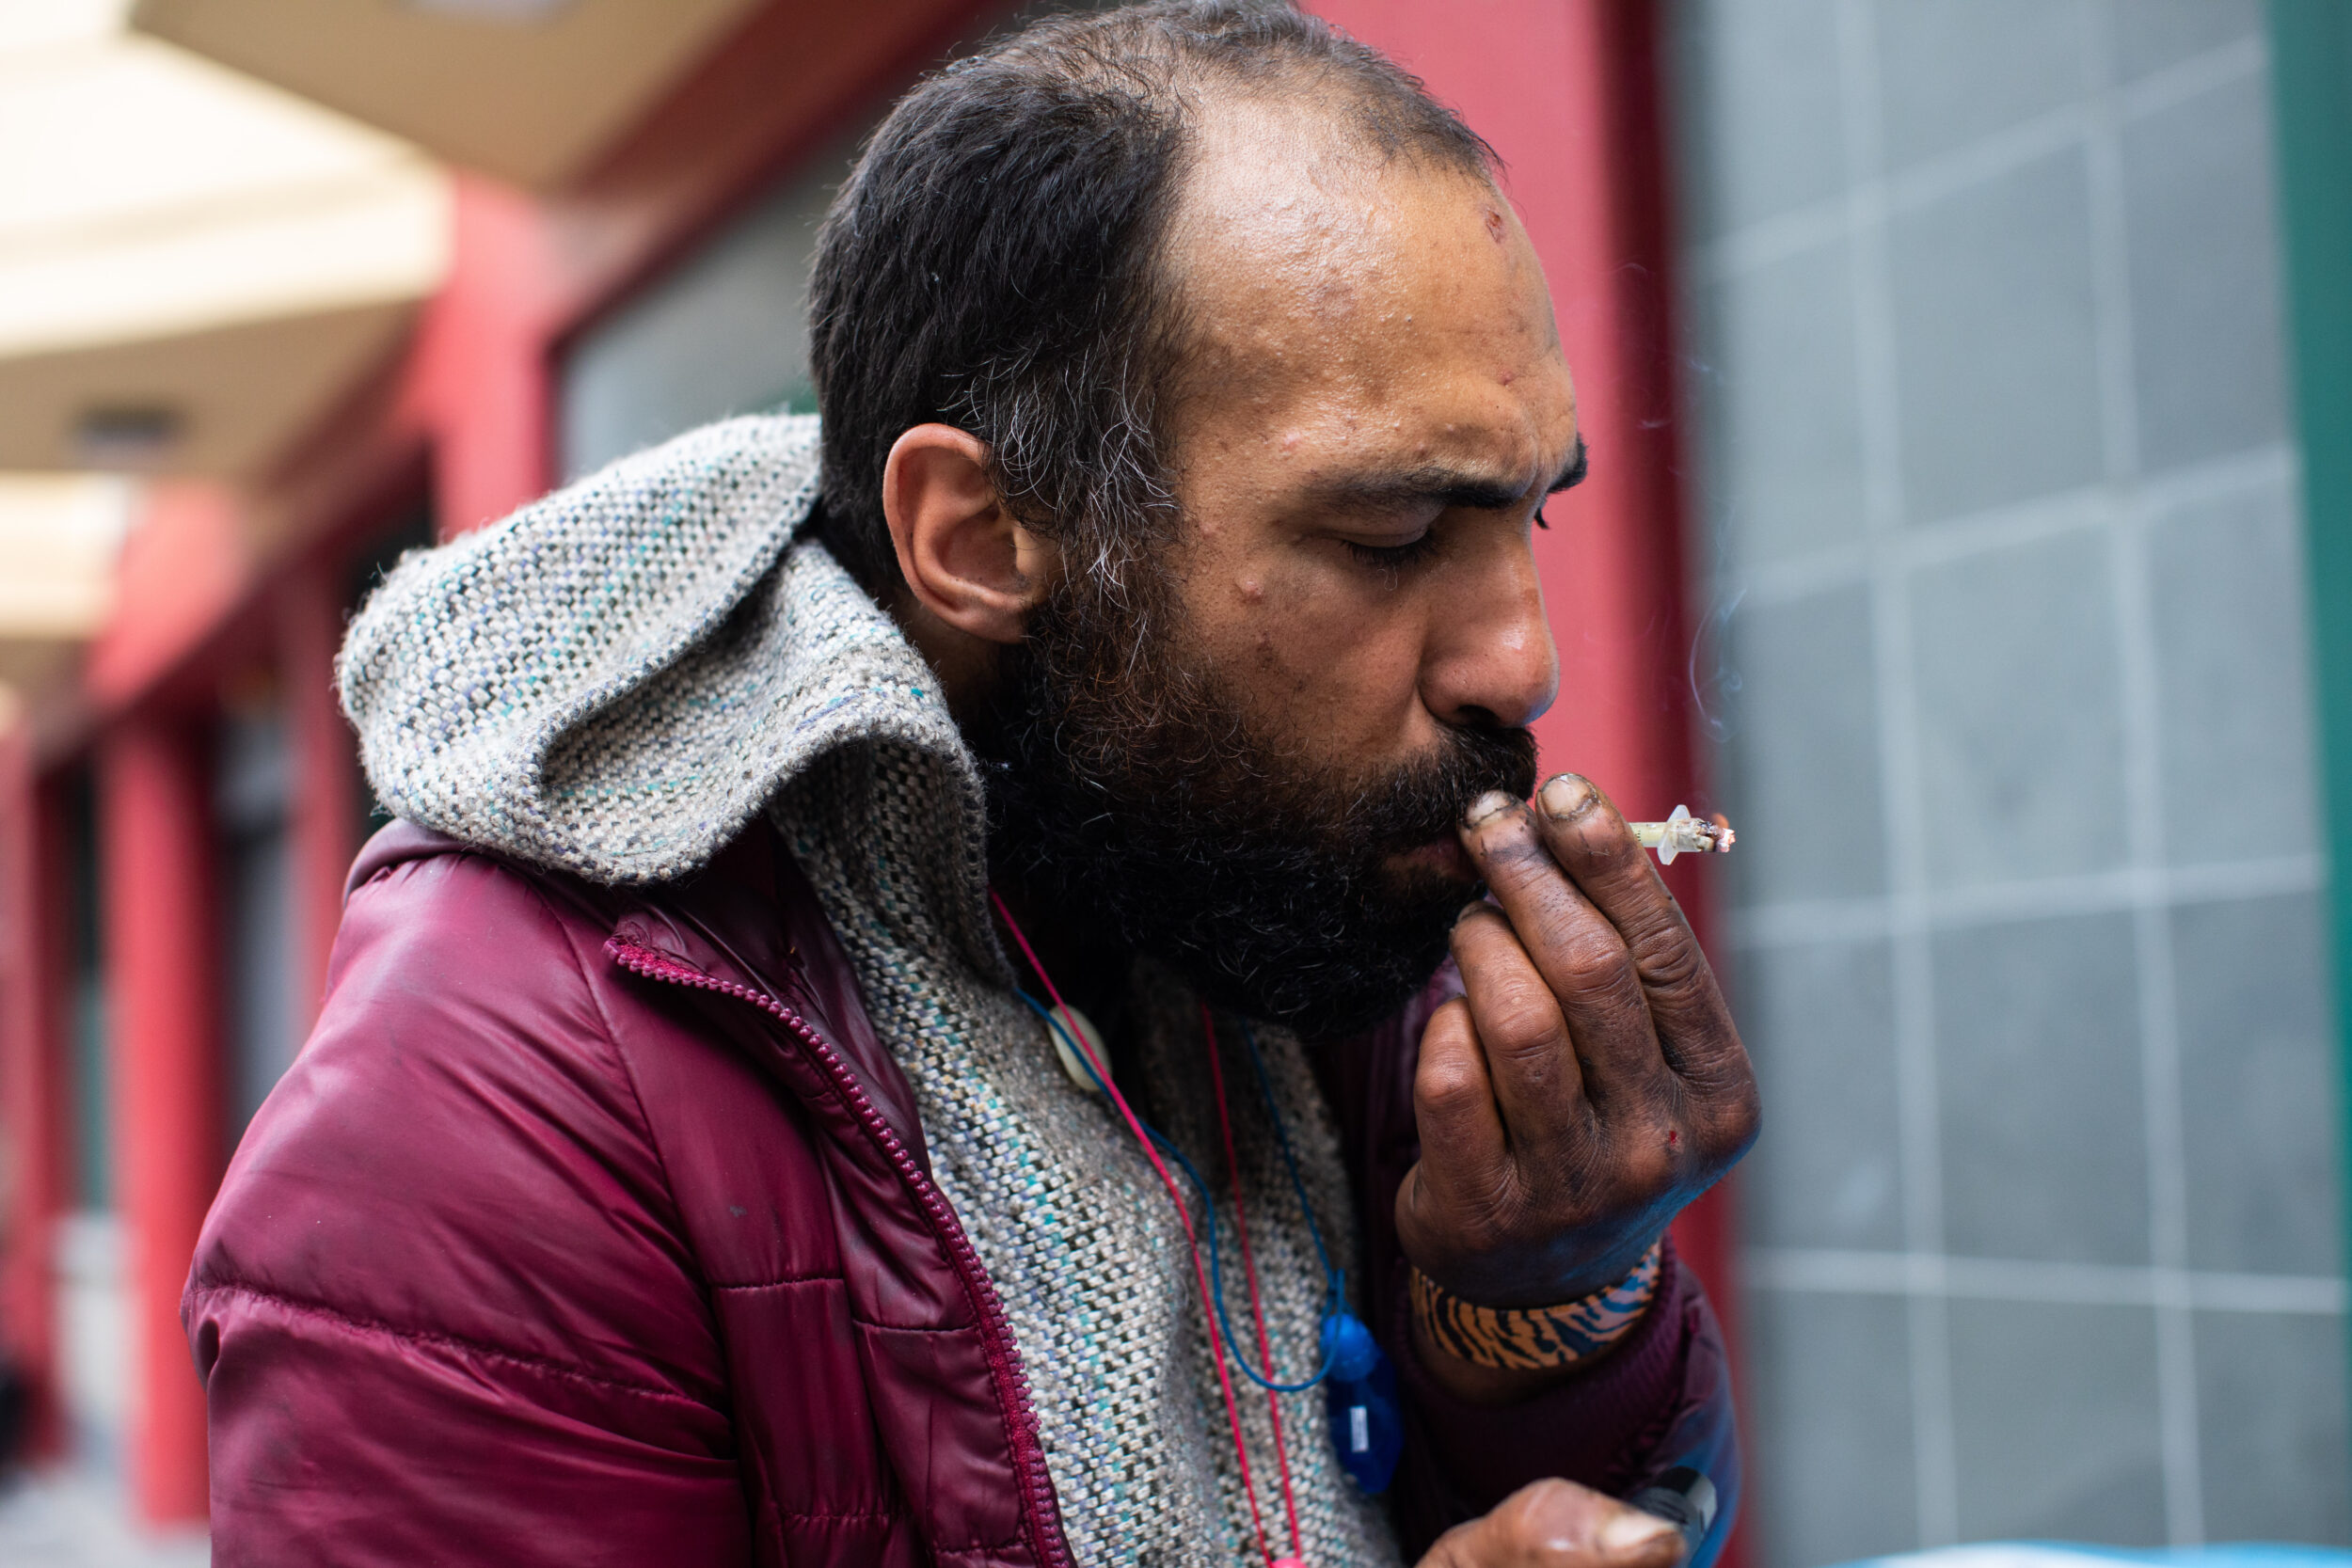 A man using drugs on the street